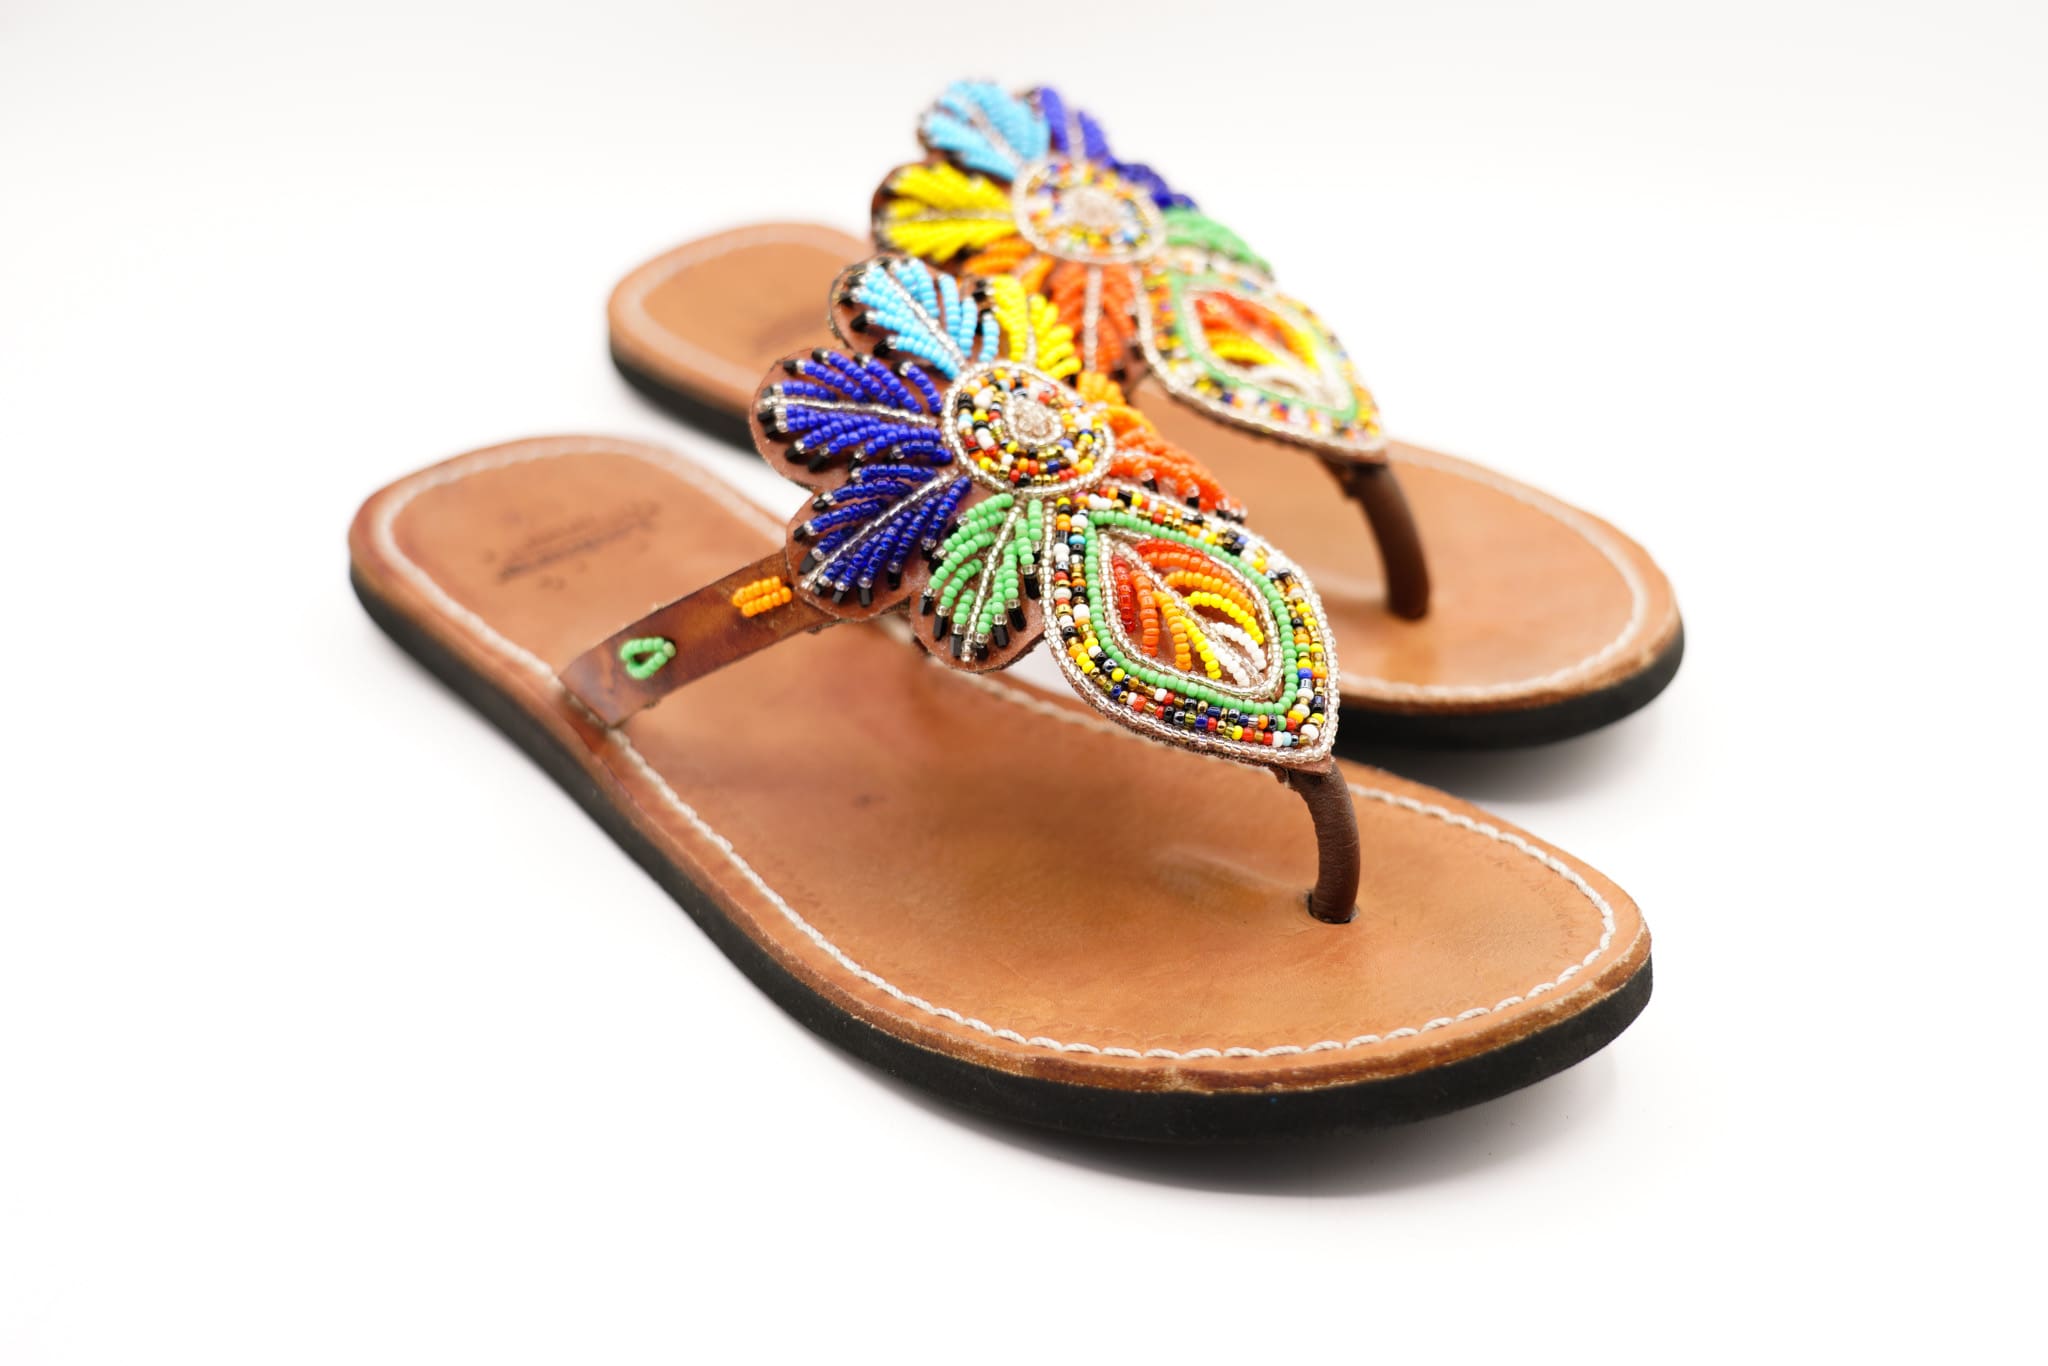 The Easy Breezy Leather Sandal